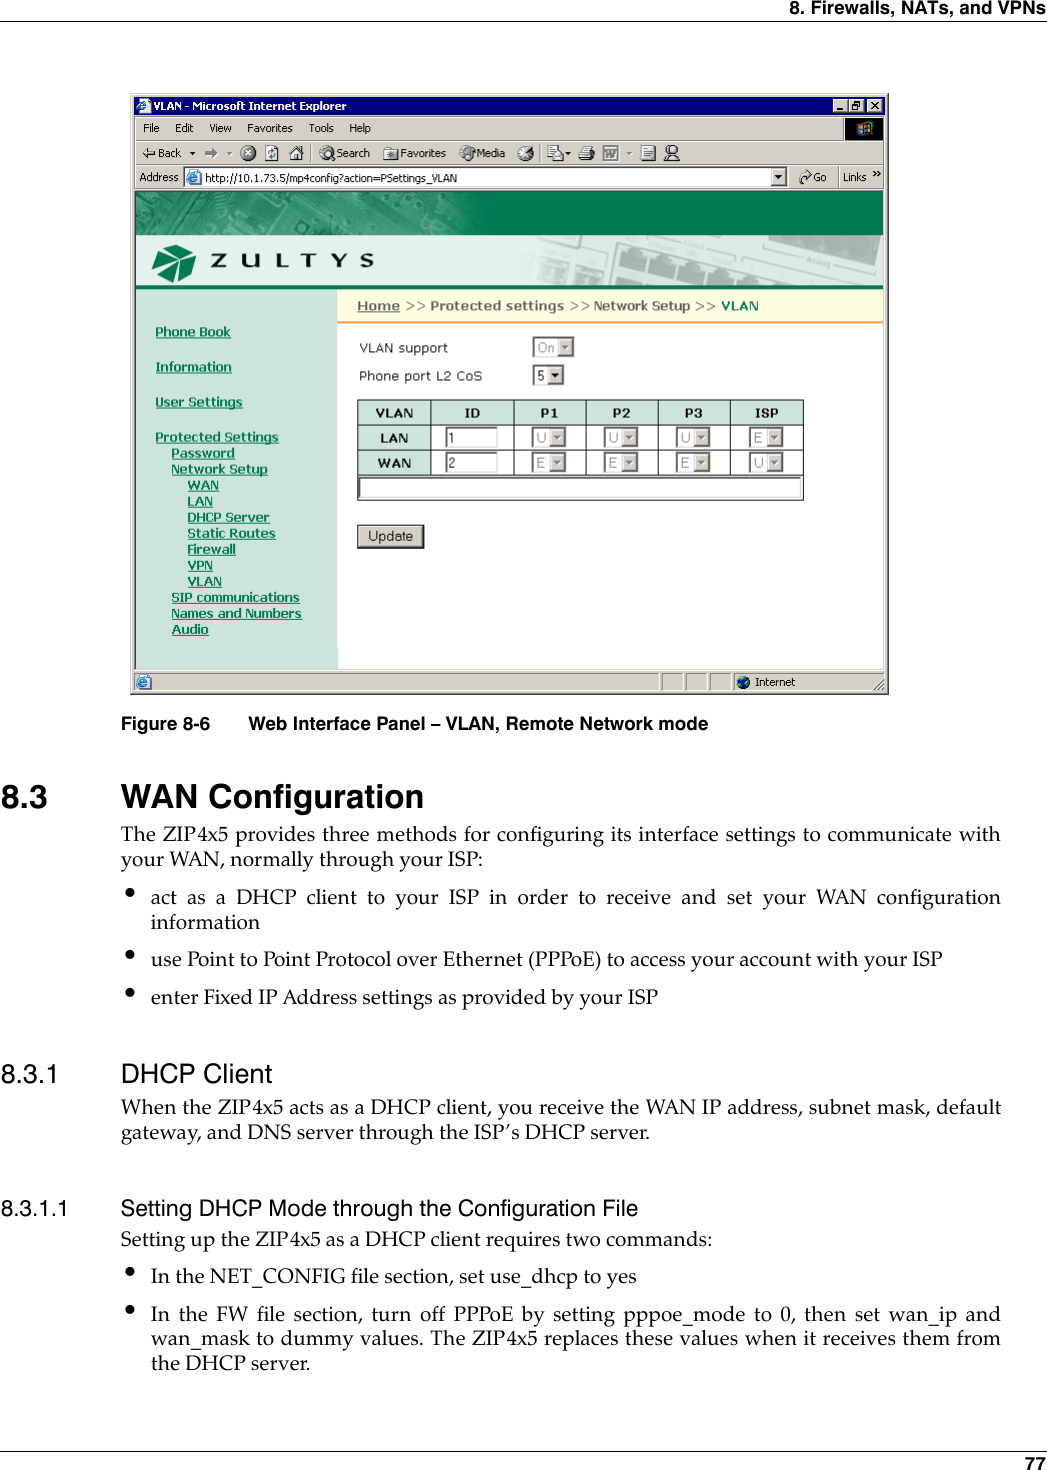 8. Firewalls, NATs, and VPNs 778.3 WAN ConfigurationThe ZIP4x5 provides three methods for configuring its interface settings to communicate withyour WAN, normally through your ISP:•act as a DHCP client to your ISP in order to receive and set your WAN configurationinformation•use Point to Point Protocol over Ethernet (PPPoE) to access your account with your ISP•enter Fixed IP Address settings as provided by your ISP8.3.1 DHCP ClientWhen the ZIP4x5 acts as a DHCP client, you receive the WAN IP address, subnet mask, defaultgateway, and DNS server through the ISP’s DHCP server.8.3.1.1 Setting DHCP Mode through the Configuration FileSetting up the ZIP4x5 as a DHCP client requires two commands:•In the NET_CONFIG file section, set use_dhcp to yes•In the FW file section, turn off PPPoE by setting pppoe_mode to 0, then set wan_ip andwan_mask to dummy values. The ZIP4x5 replaces these values when it receives them fromthe DHCP server.Figure 8-6 Web Interface Panel – VLAN, Remote Network mode